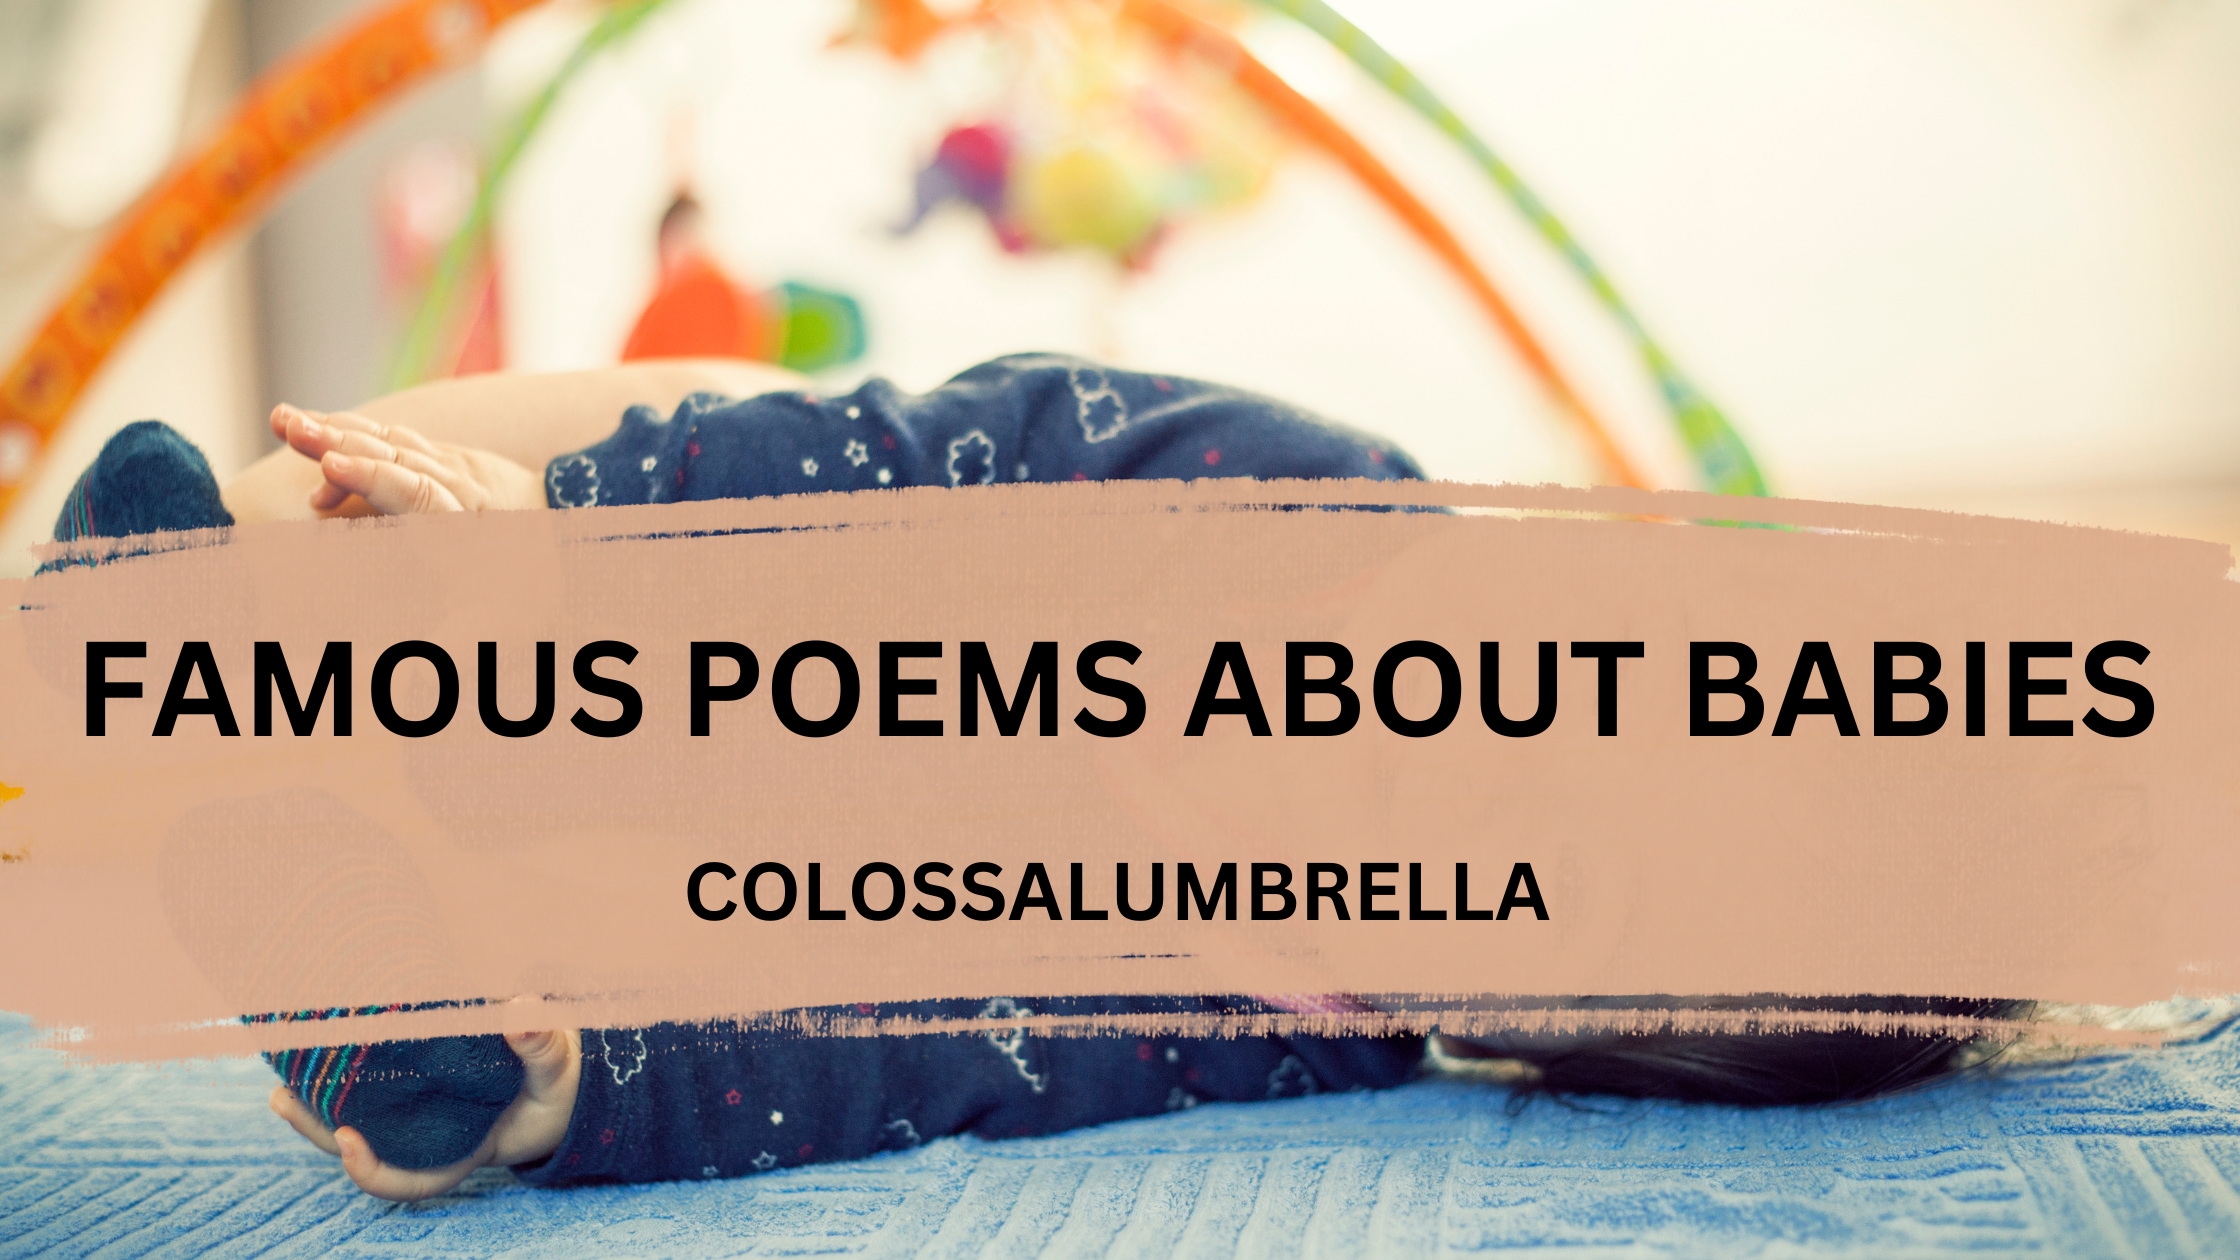 15 Adorable and Famous Poems About Babies